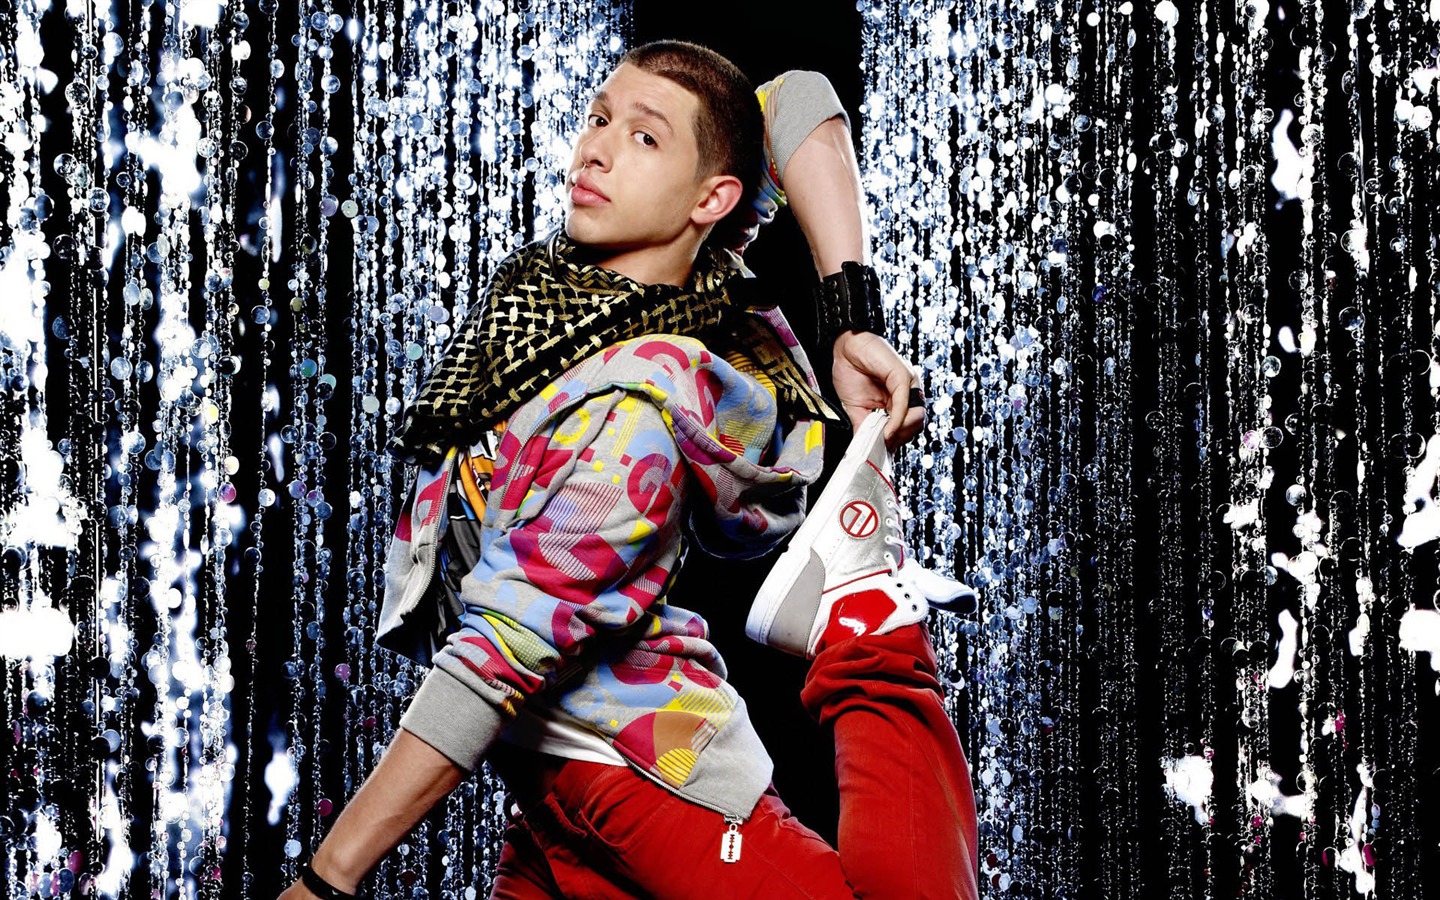 So You Think You Can Dance wallpaper (3) #2 - 1440x900